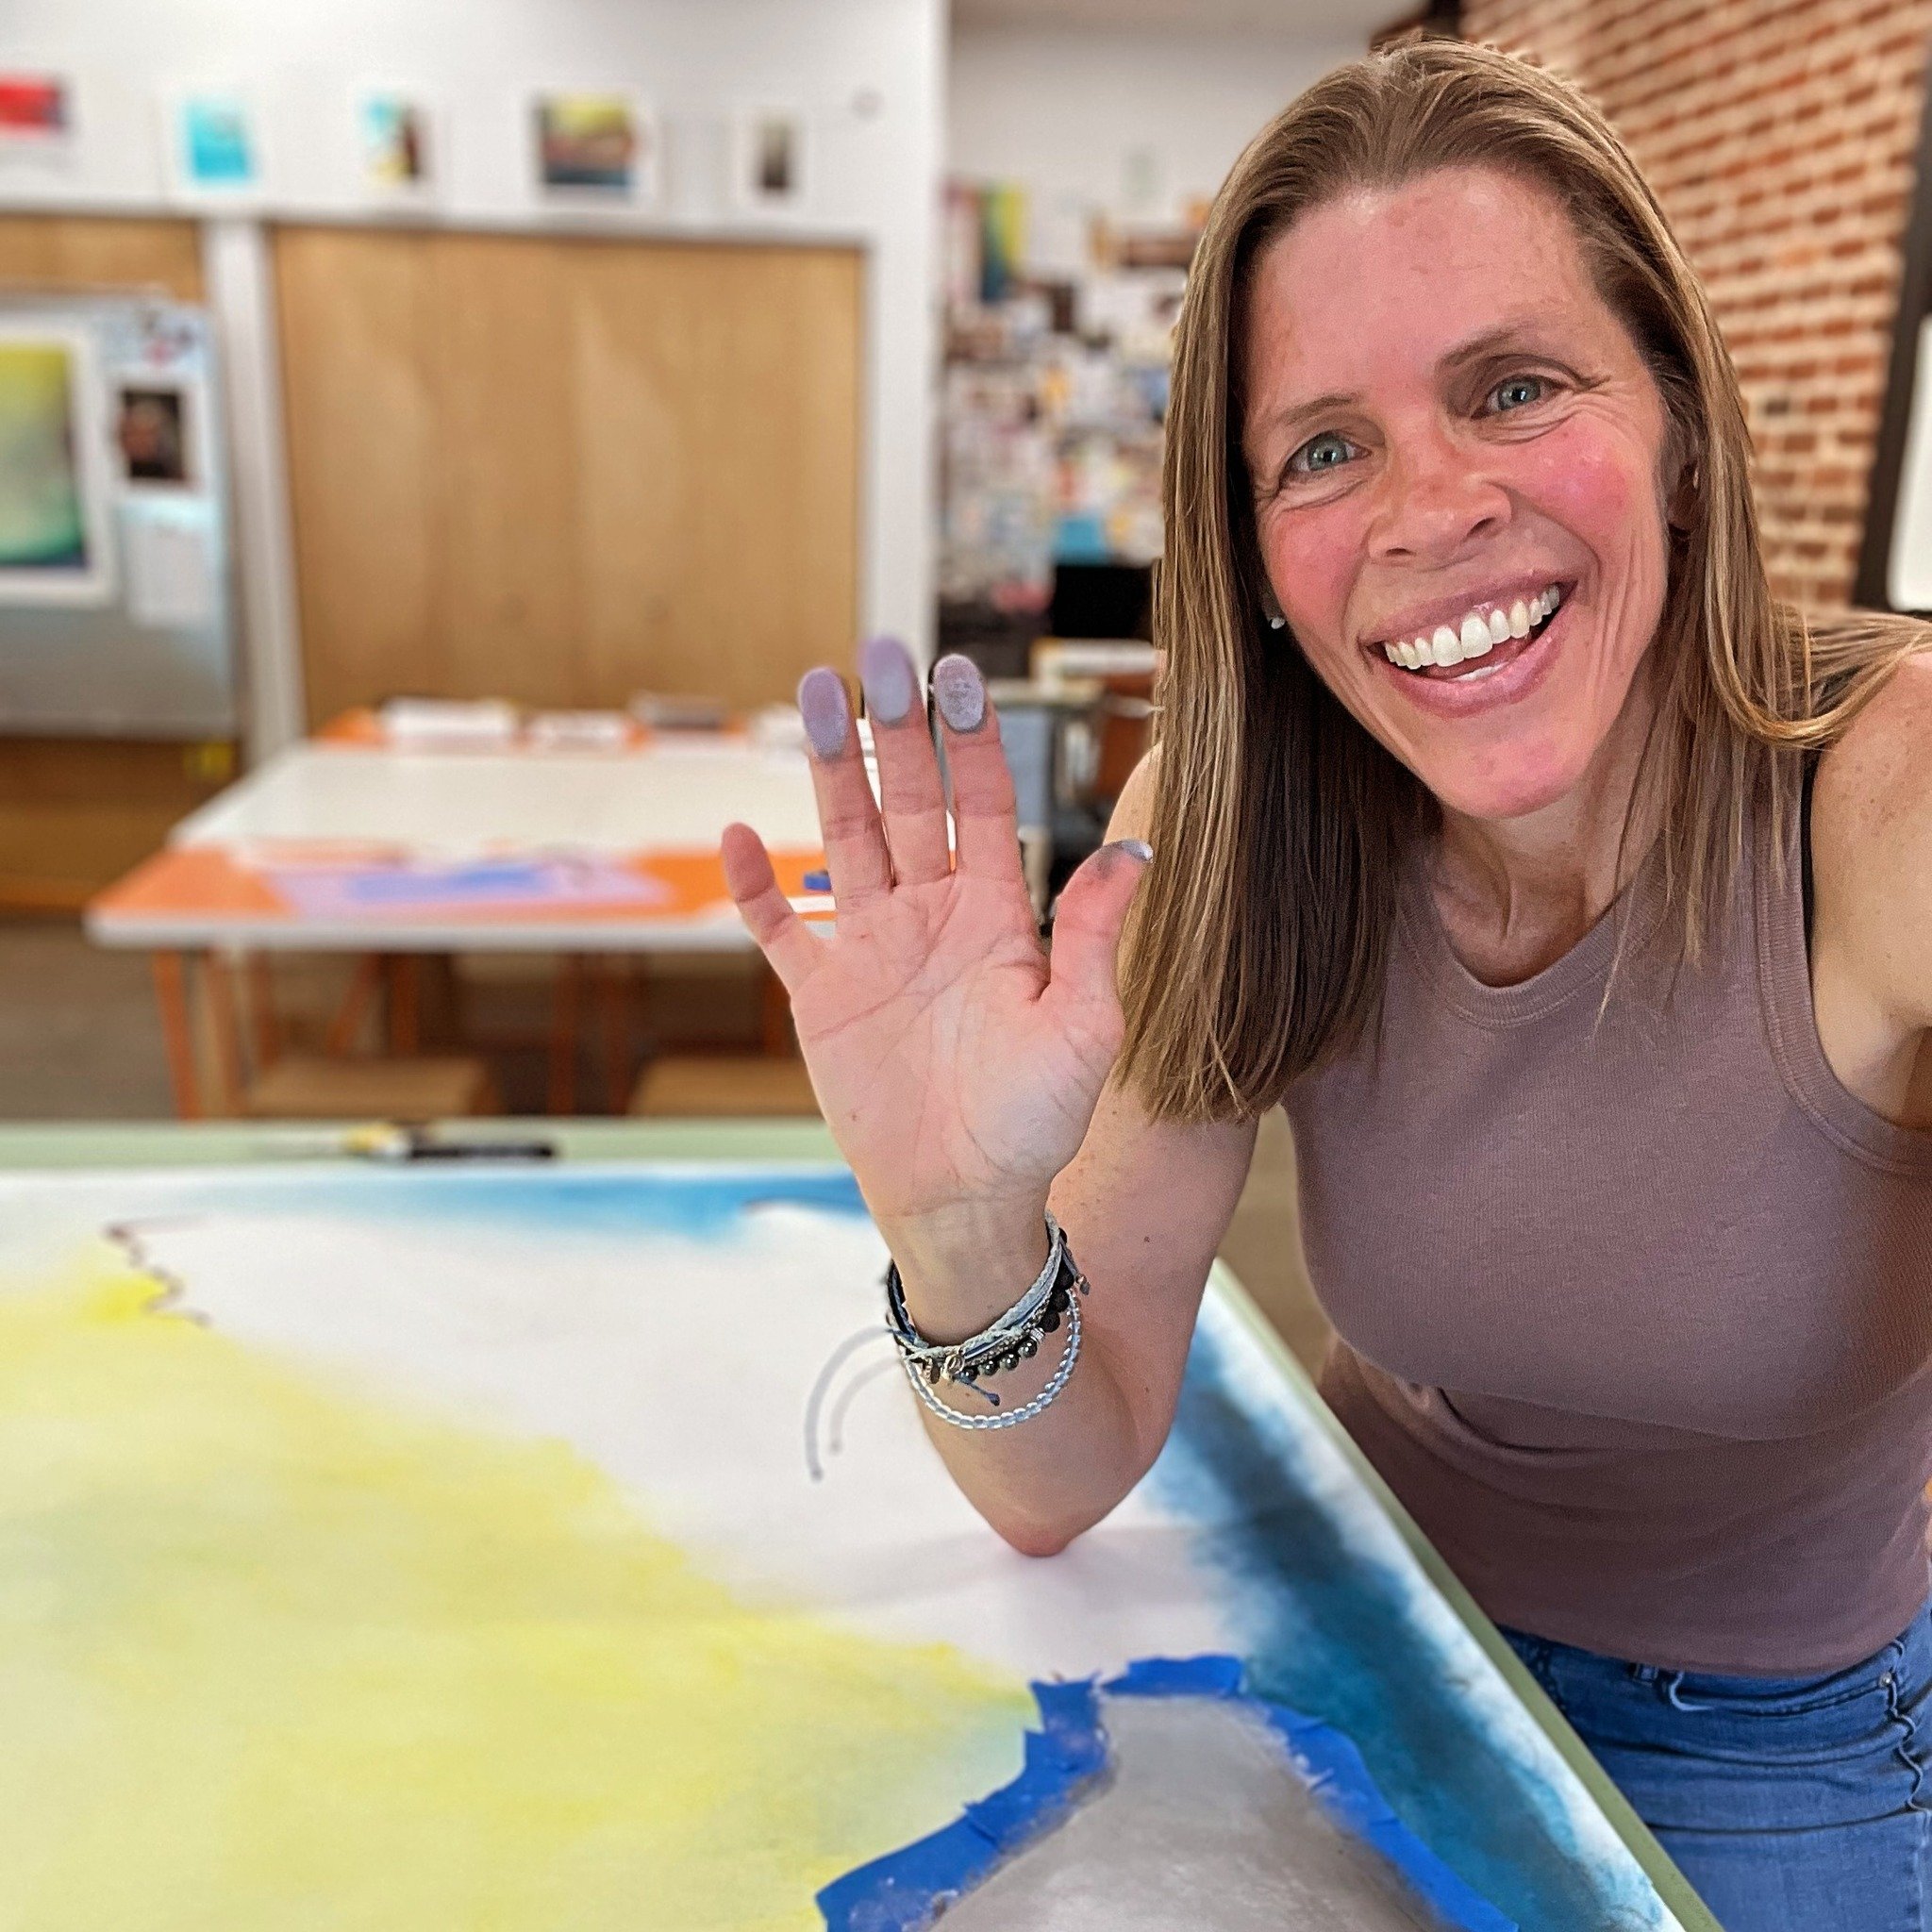 Hi from the studio! 

This space has held a lot of fun, creative energy over the last 10+ years &hellip; I am grateful to be able to continue filling it with not just my own artwork @gingerhuebnerart but with explorations and works by so many others 